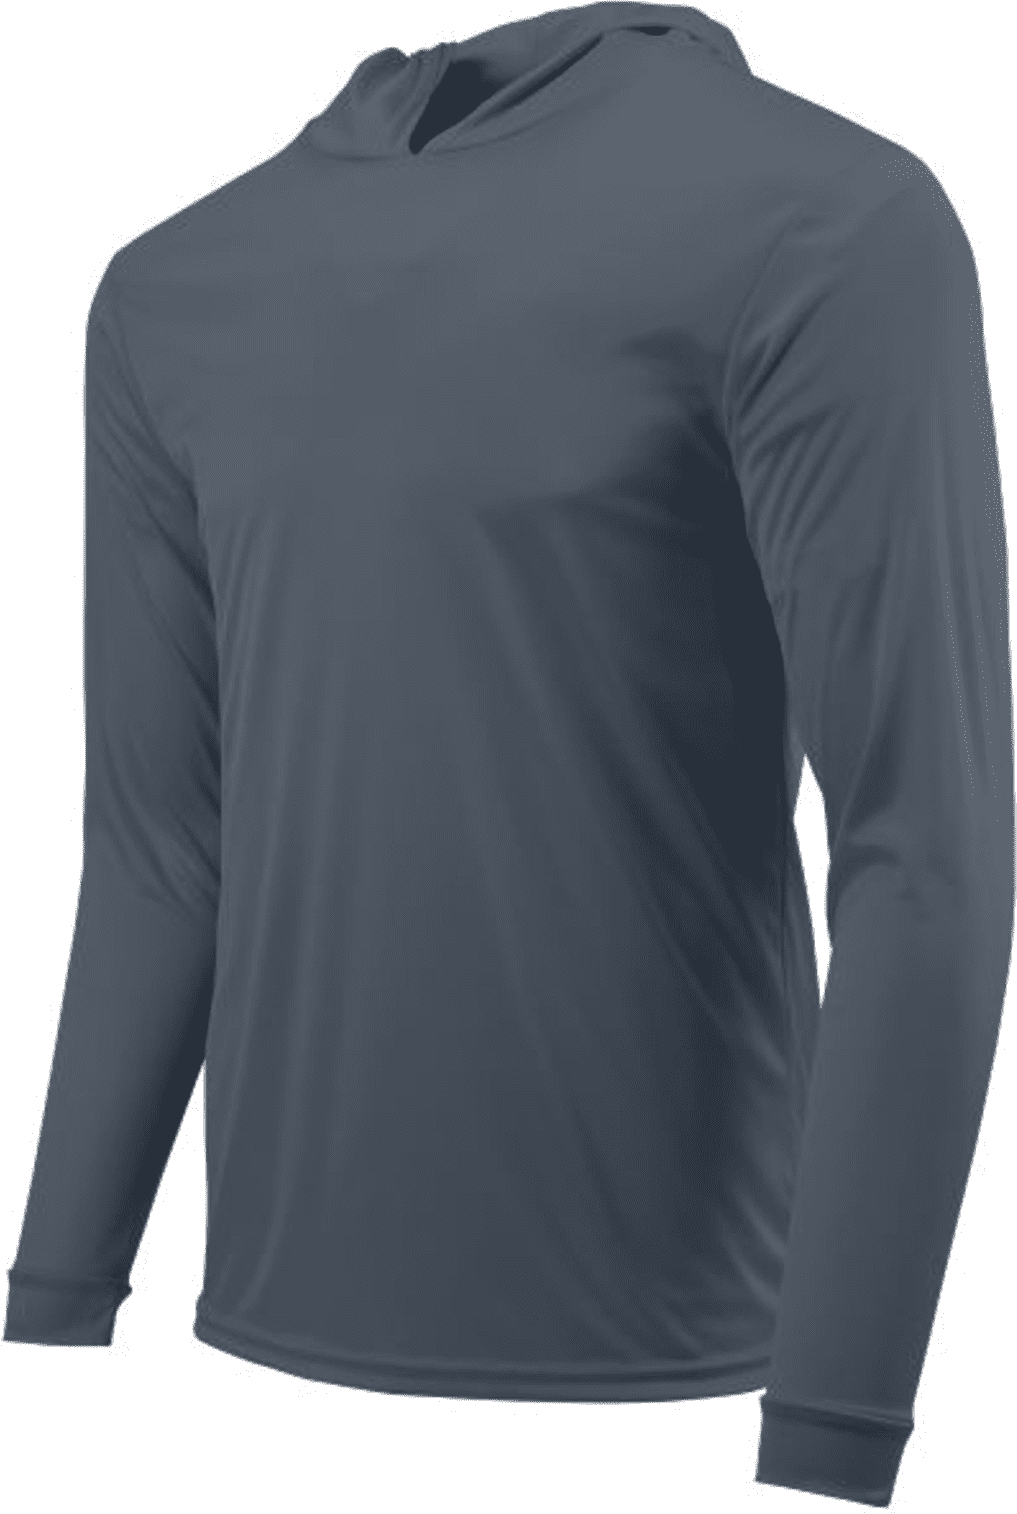 Paragon 220 Adult Long Sleeve Performance Hood - Graphite - HIT a Double